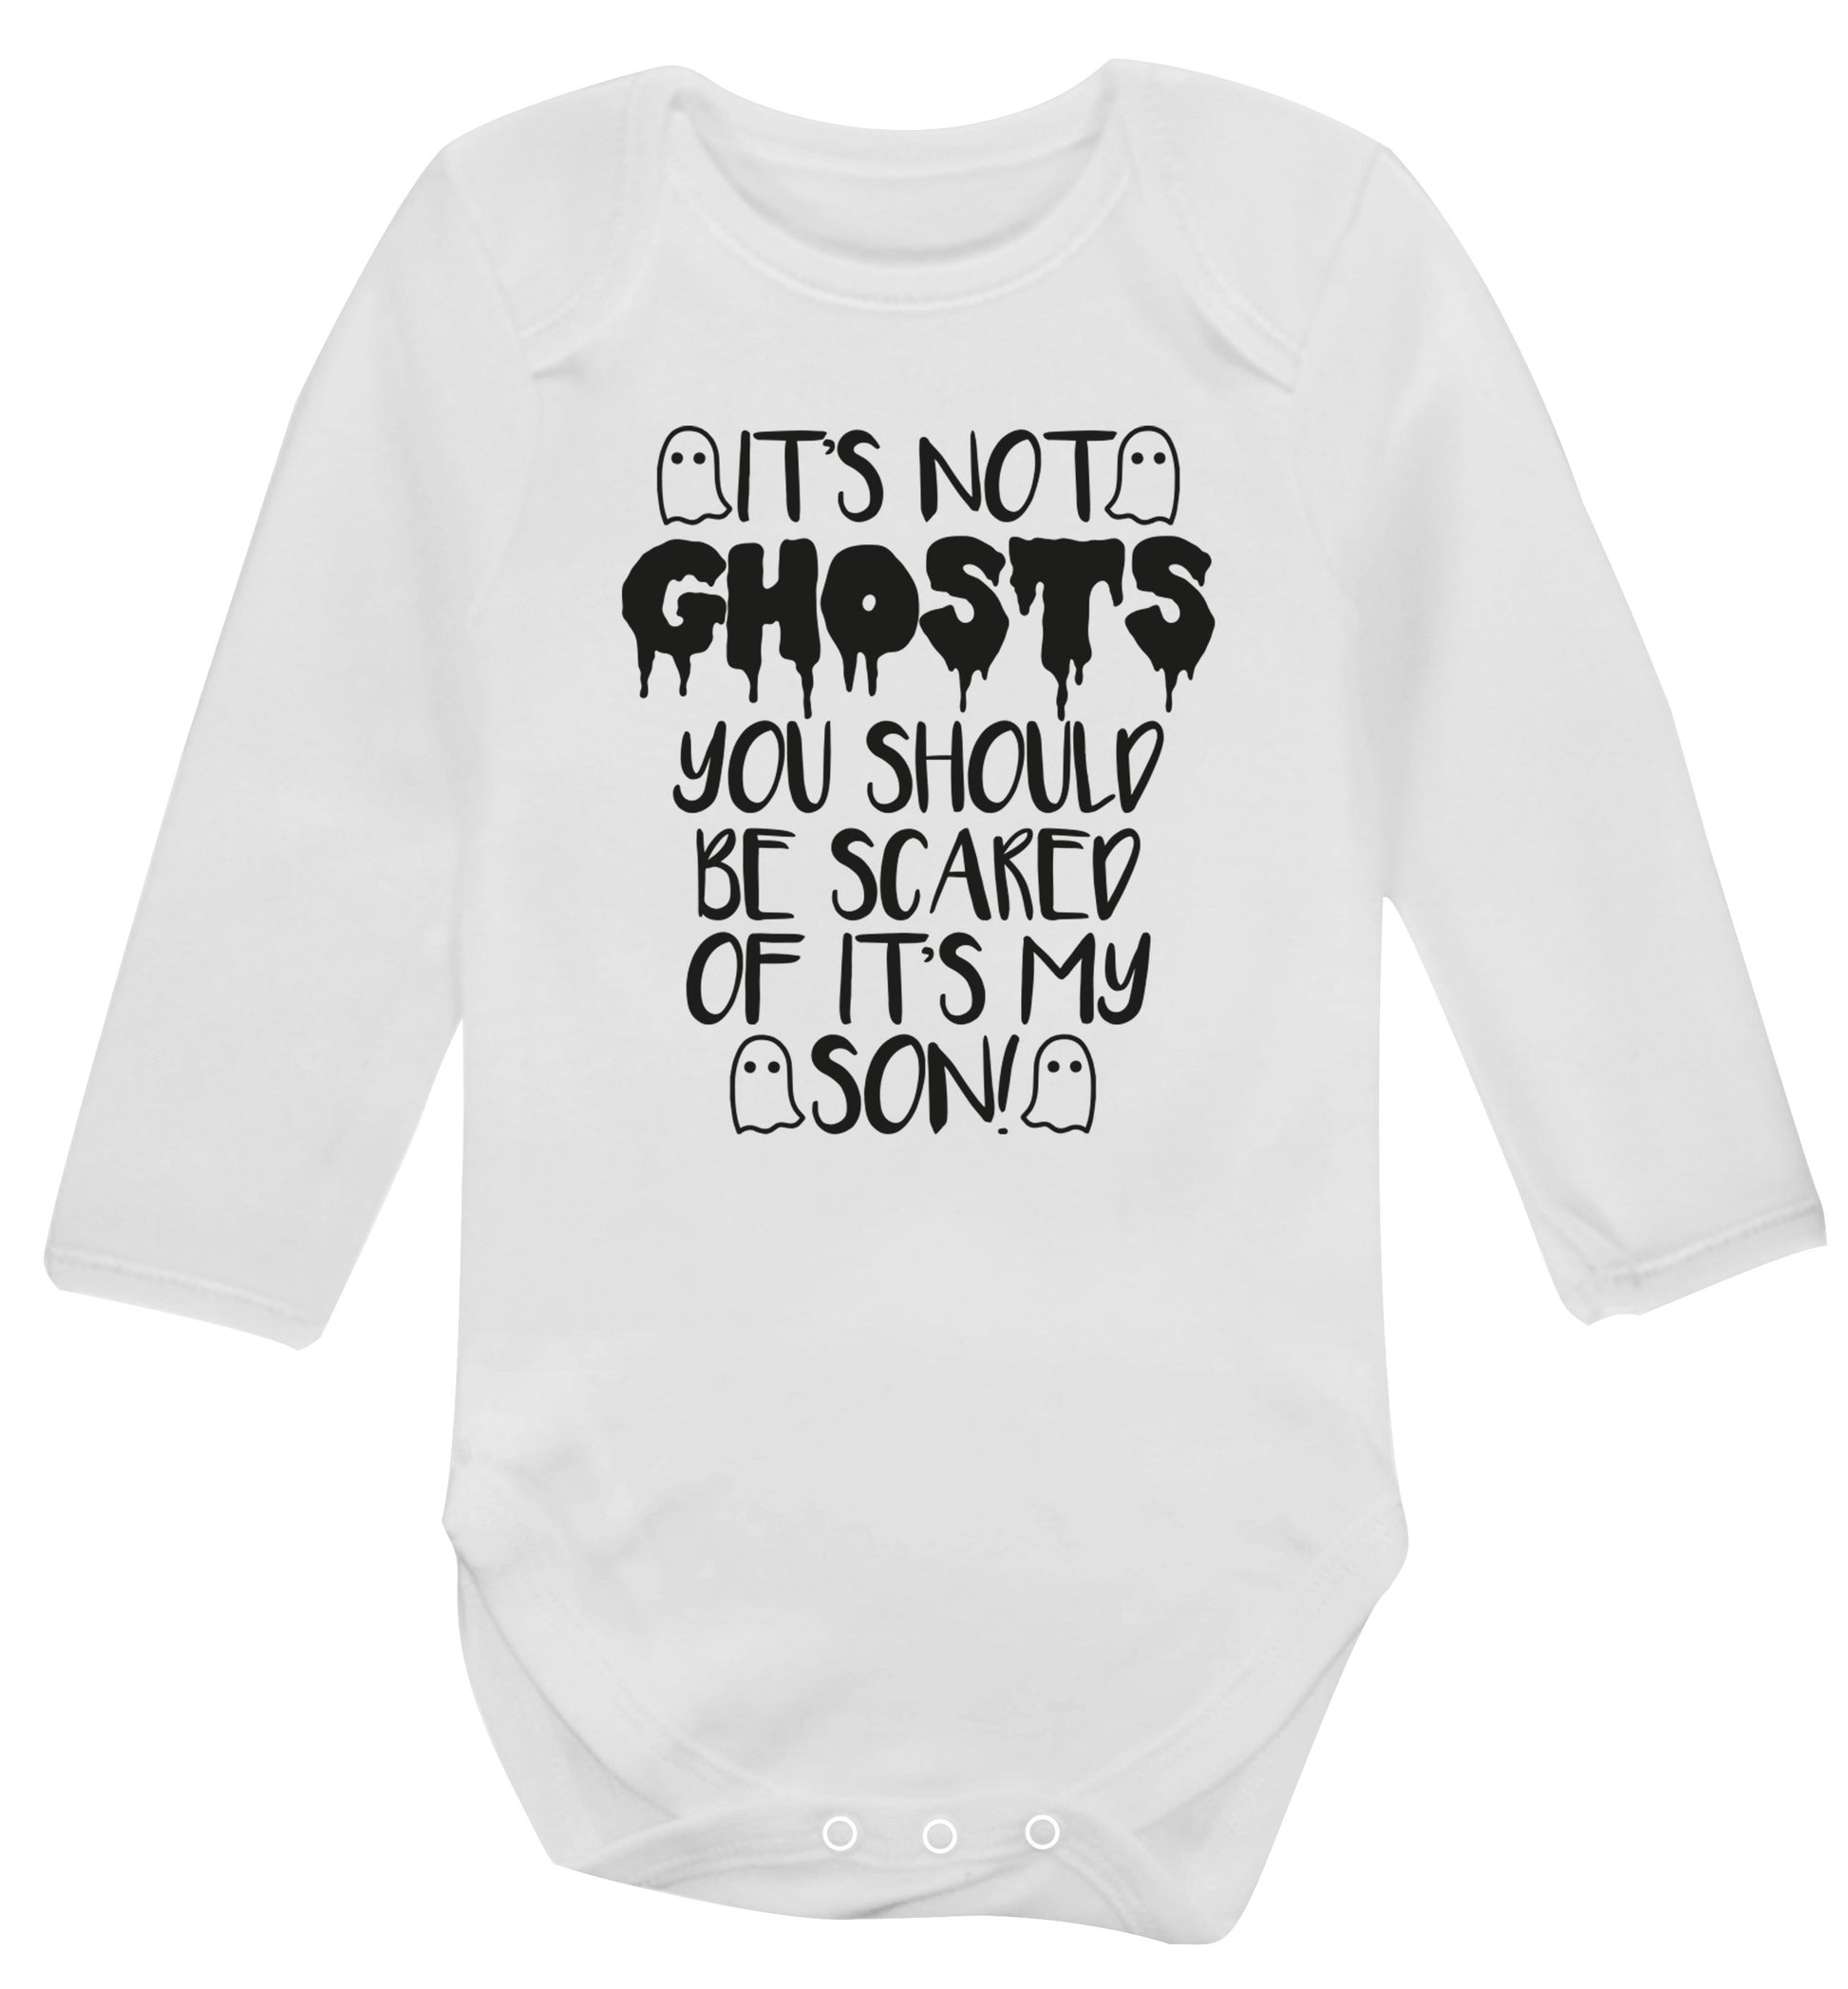 It's not ghosts you should be scared of it's my son! Baby Vest long sleeved white 6-12 months